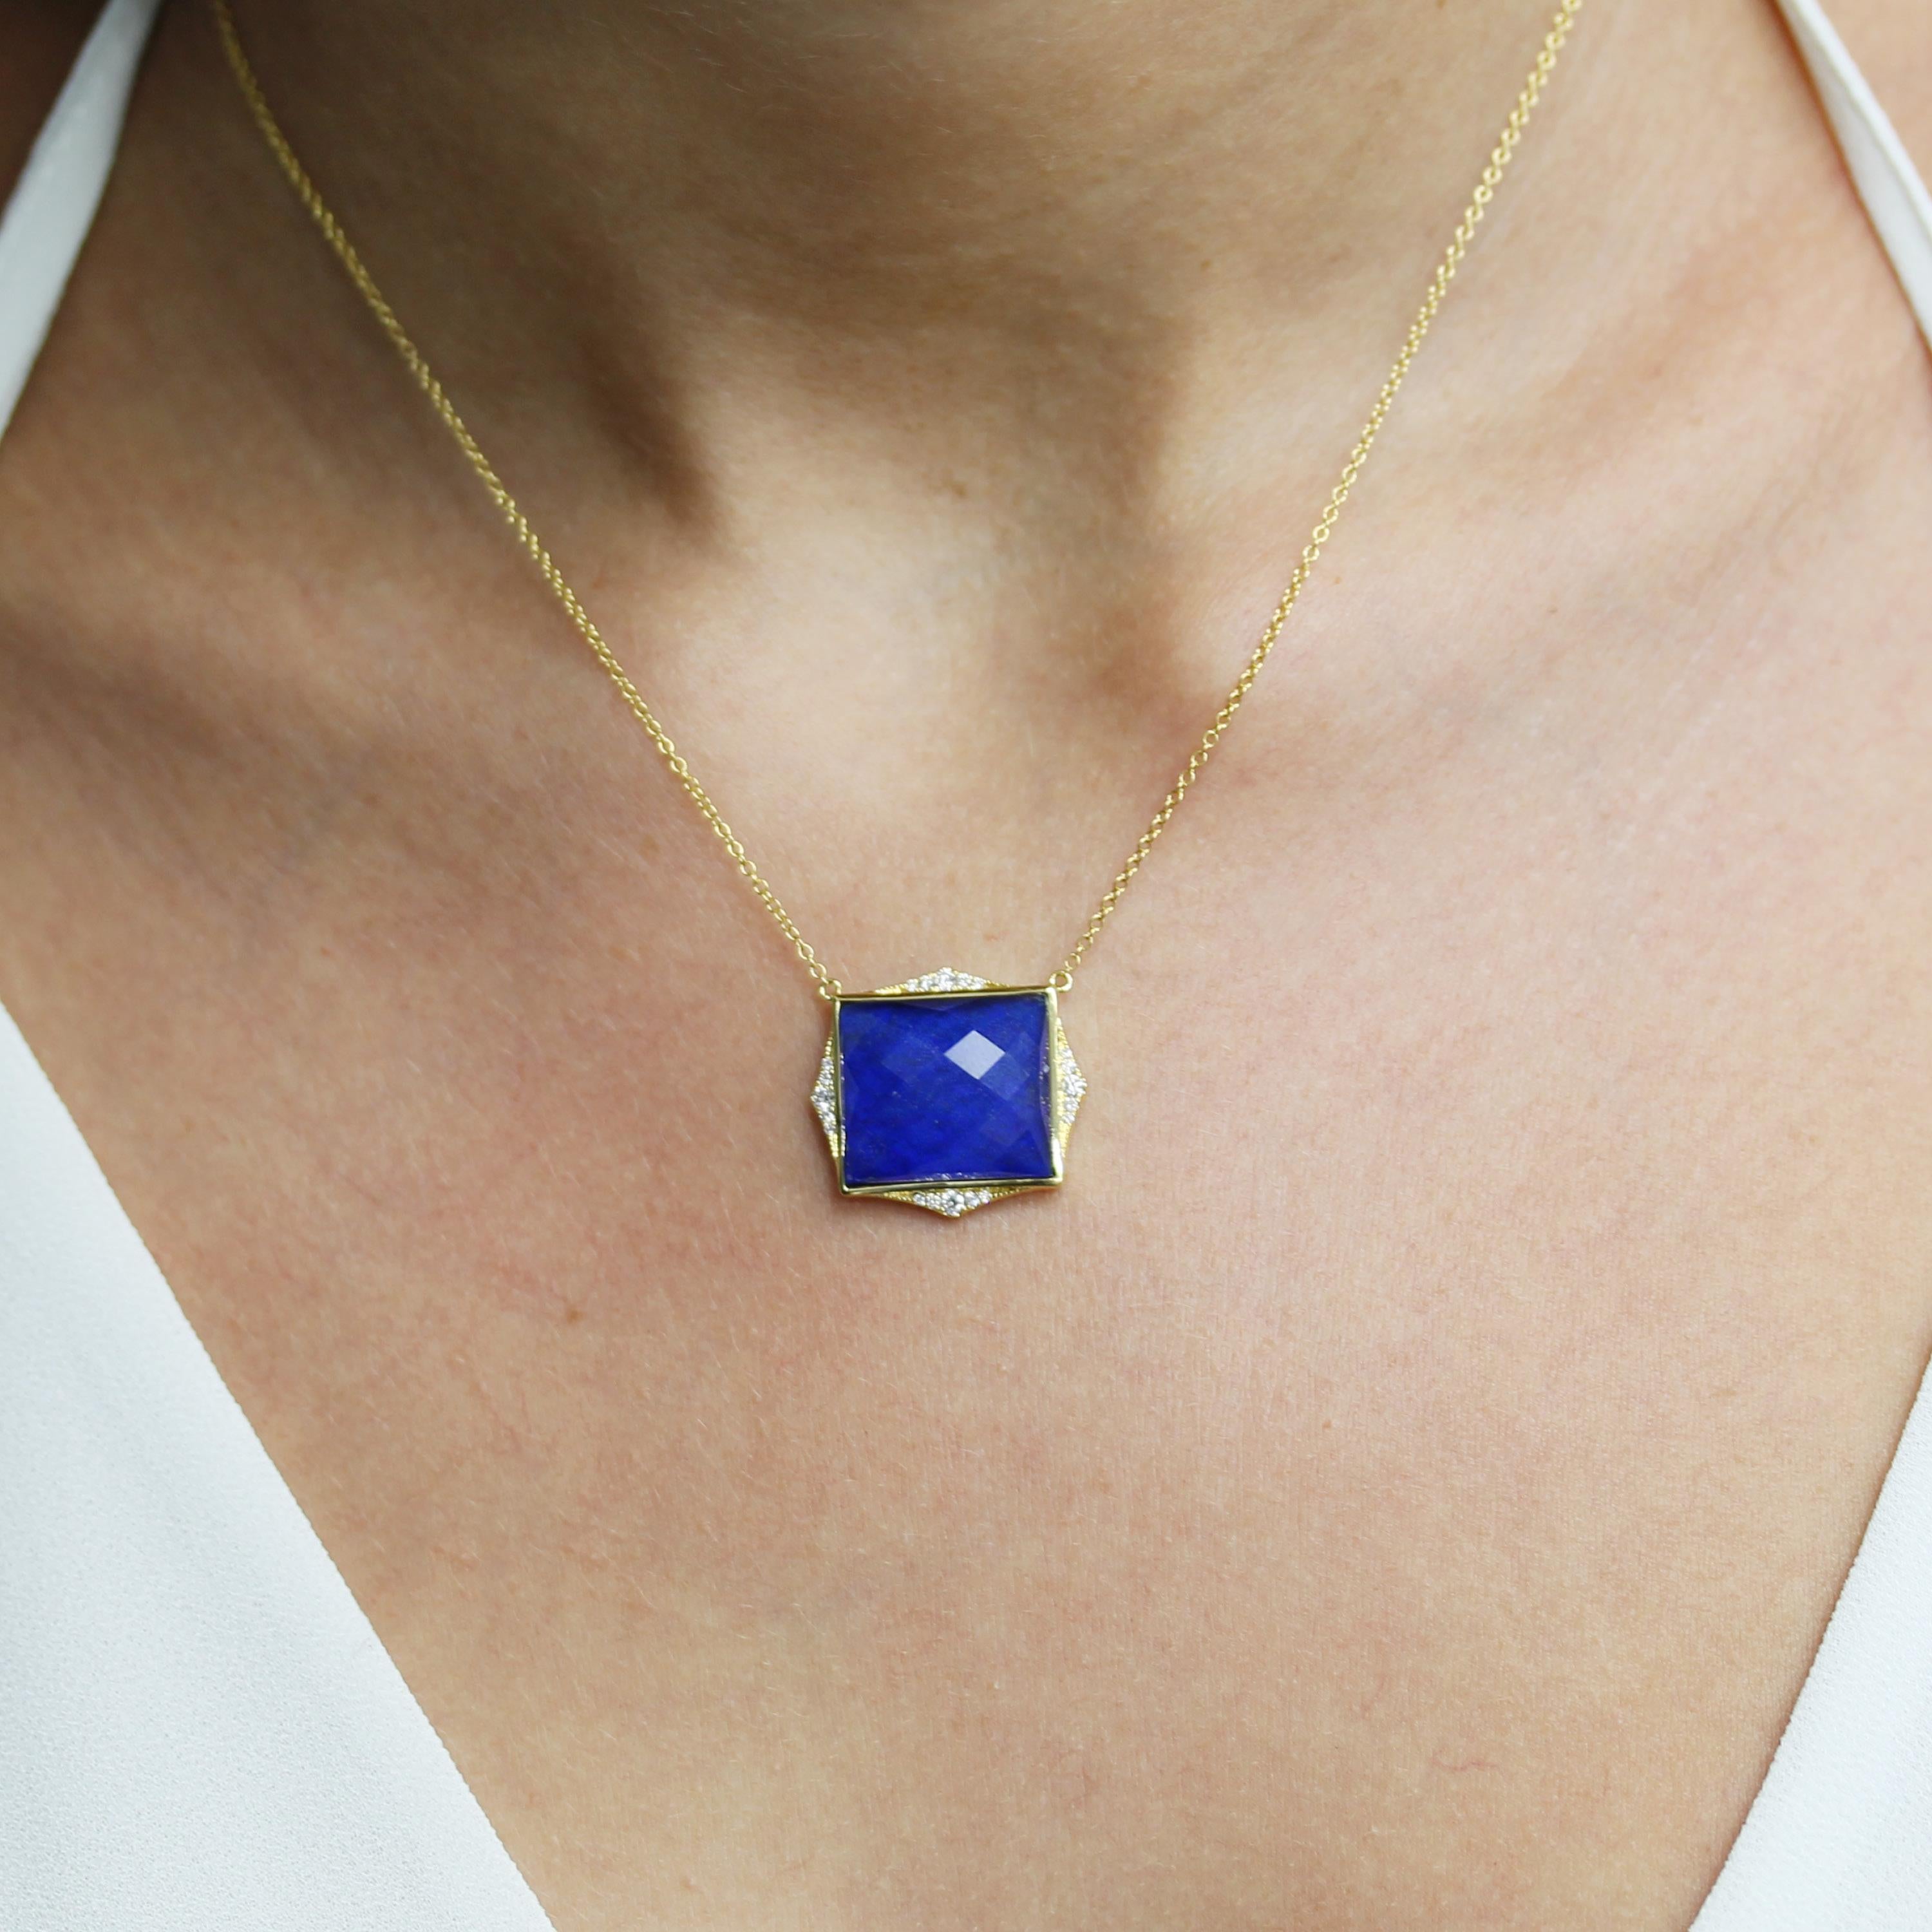 Royal Lapis Necklace featuring cushion-cut, White Quartz layered with Natural Lapis Lazuli, and Diamonds, set in 18K yellow gold. 18K 18